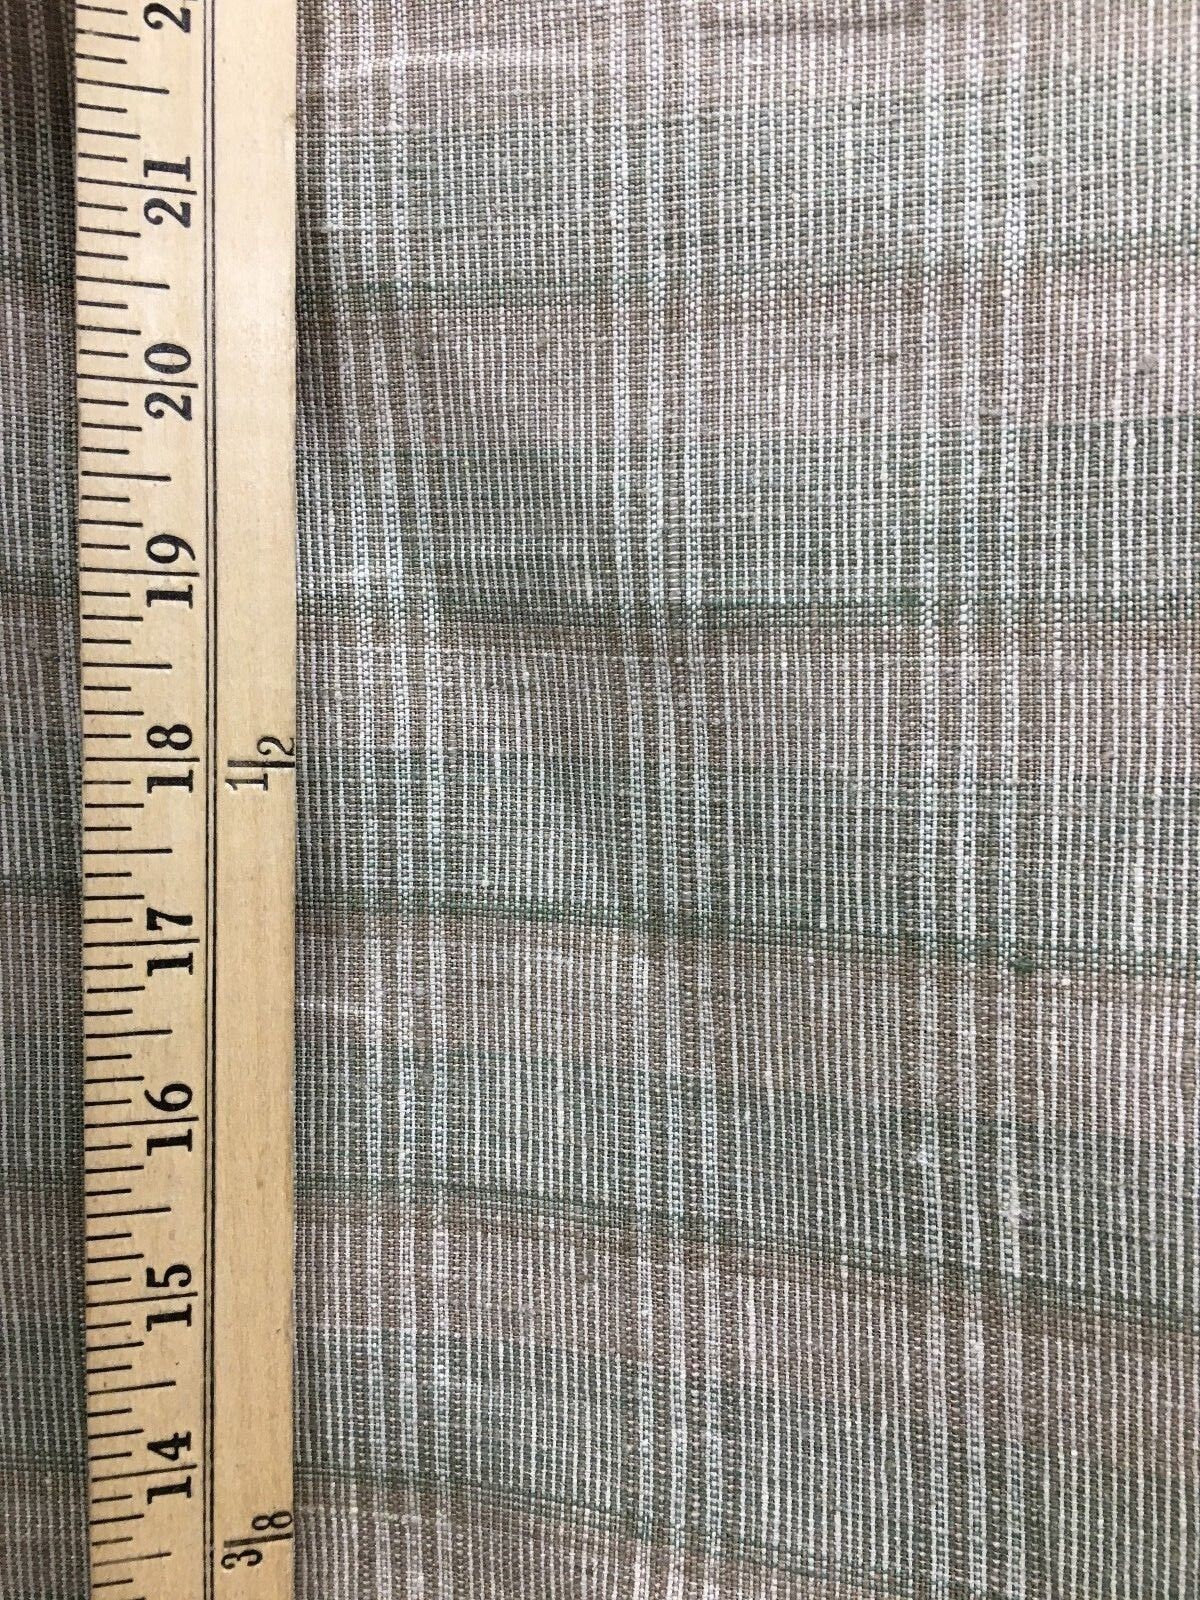 Beige Green Brown Plaid 100% Linen Fabric (60 in.) 20 Yards